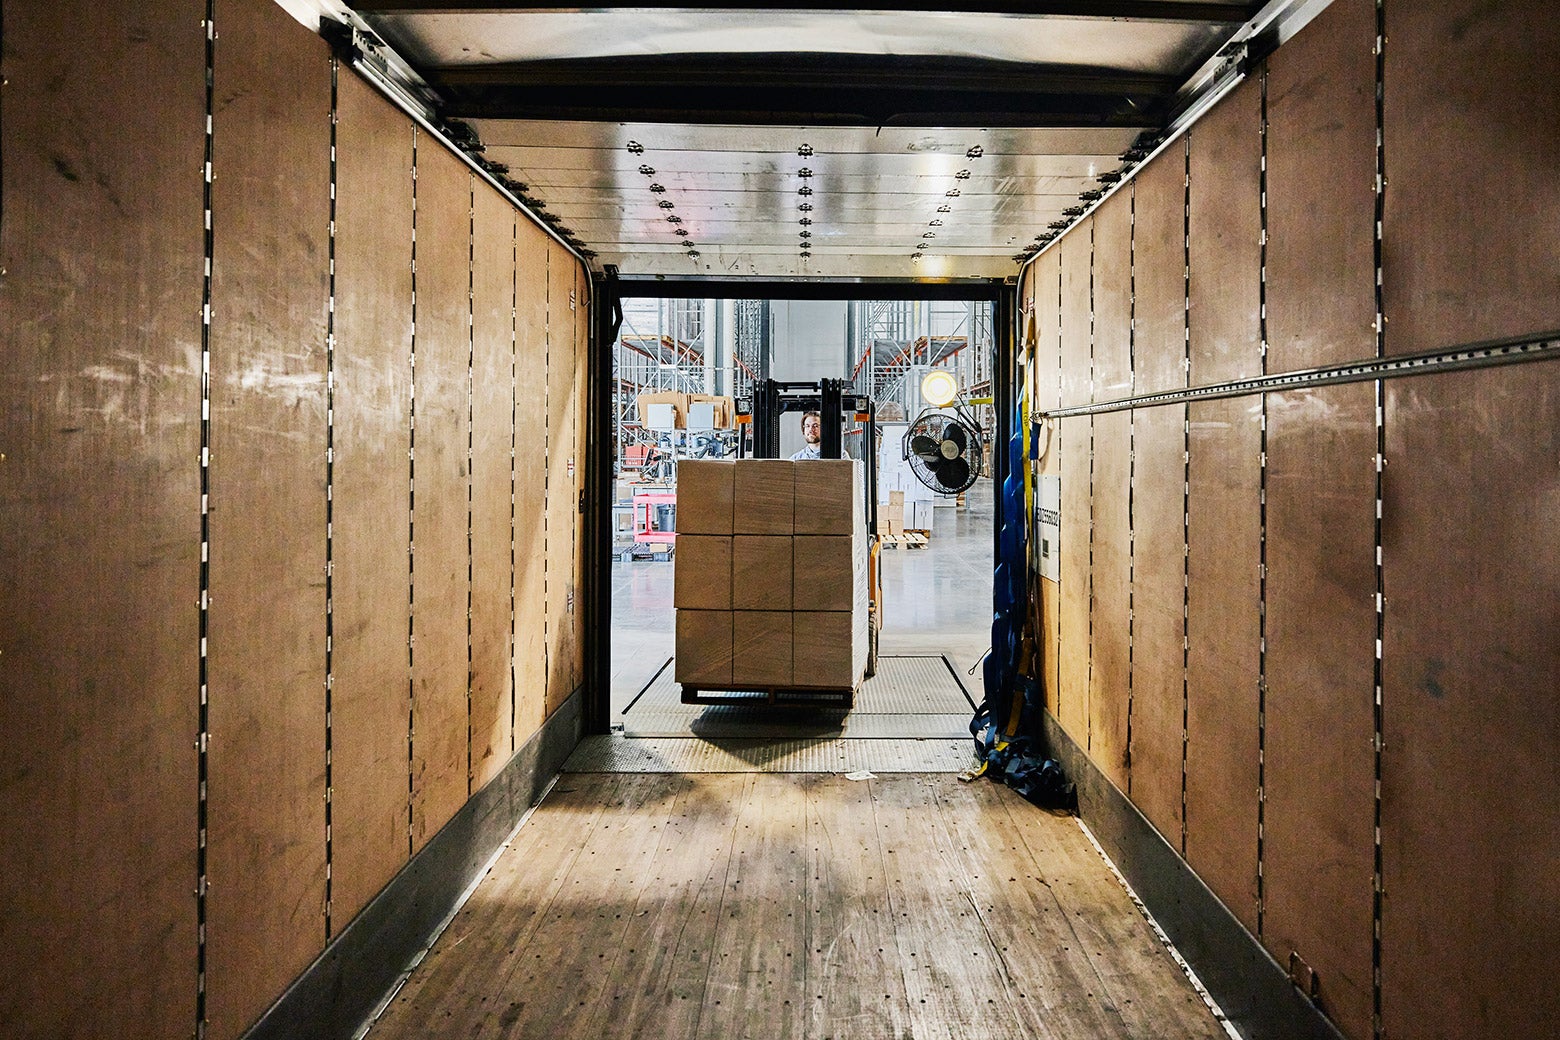 A wide view from inside of truck trailer of a warehouse worker using a forklift to load a pallet of boxes.